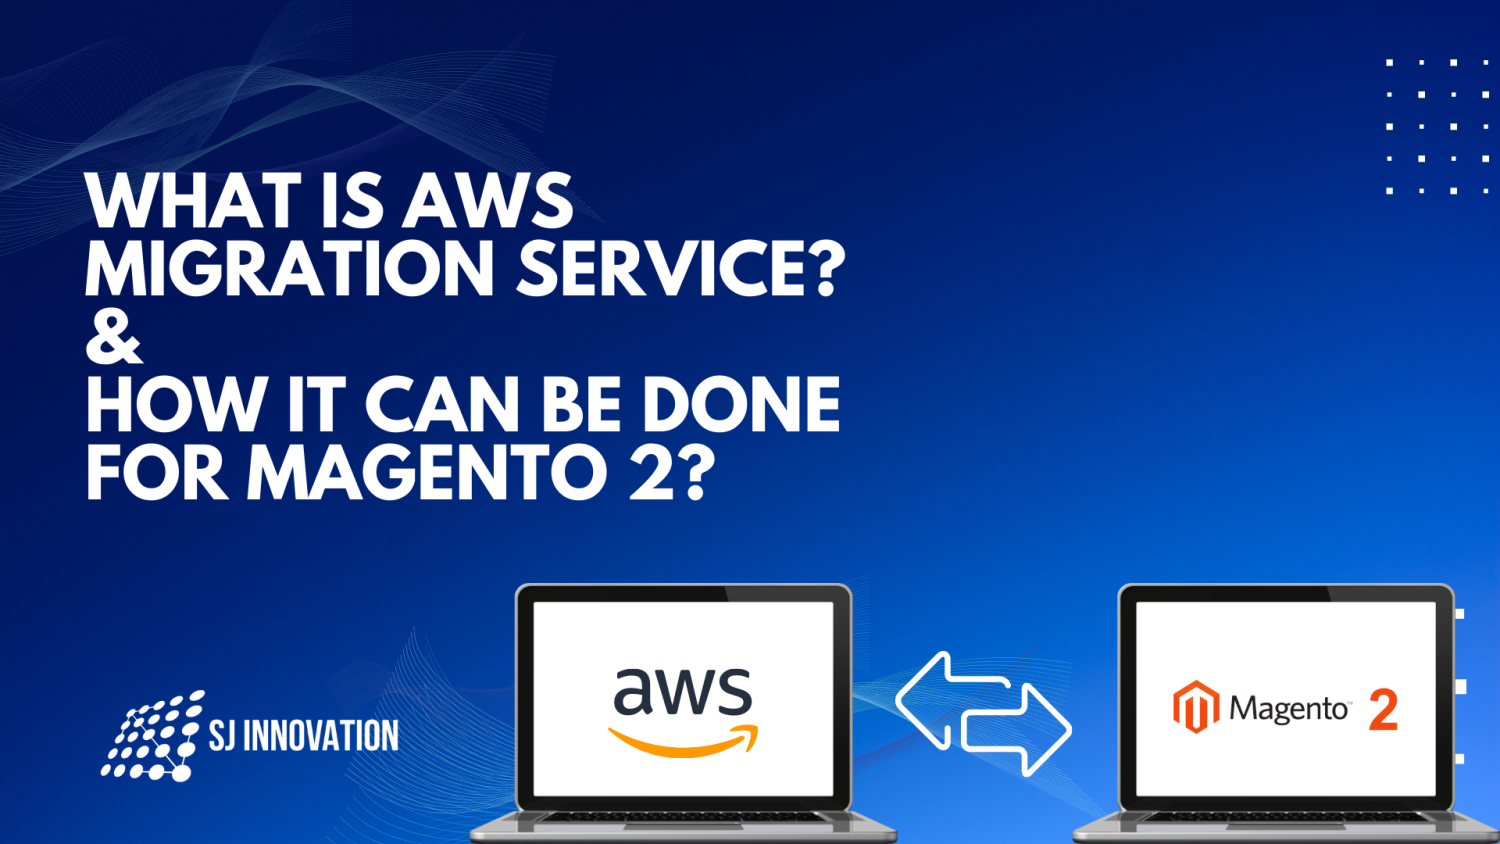 AWS Migration Service, What Is AWS Migration Service? How It Can Be Done For Magento 2?